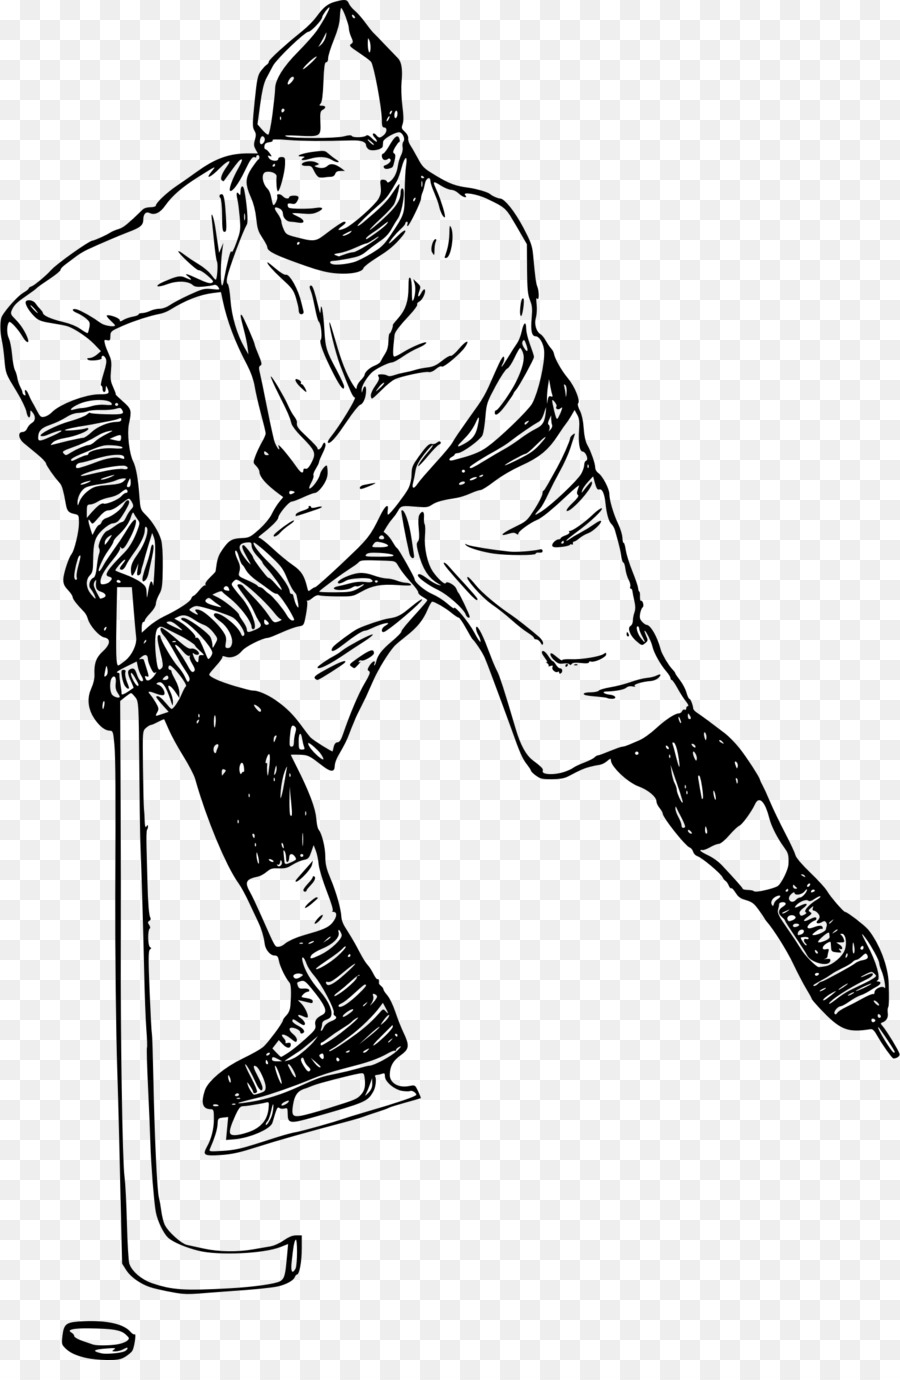 Ice Hockey Player Hockey Sticks Clip art - players vector png download - 1588*2400 - Free Transparent Ice Hockey png Download.